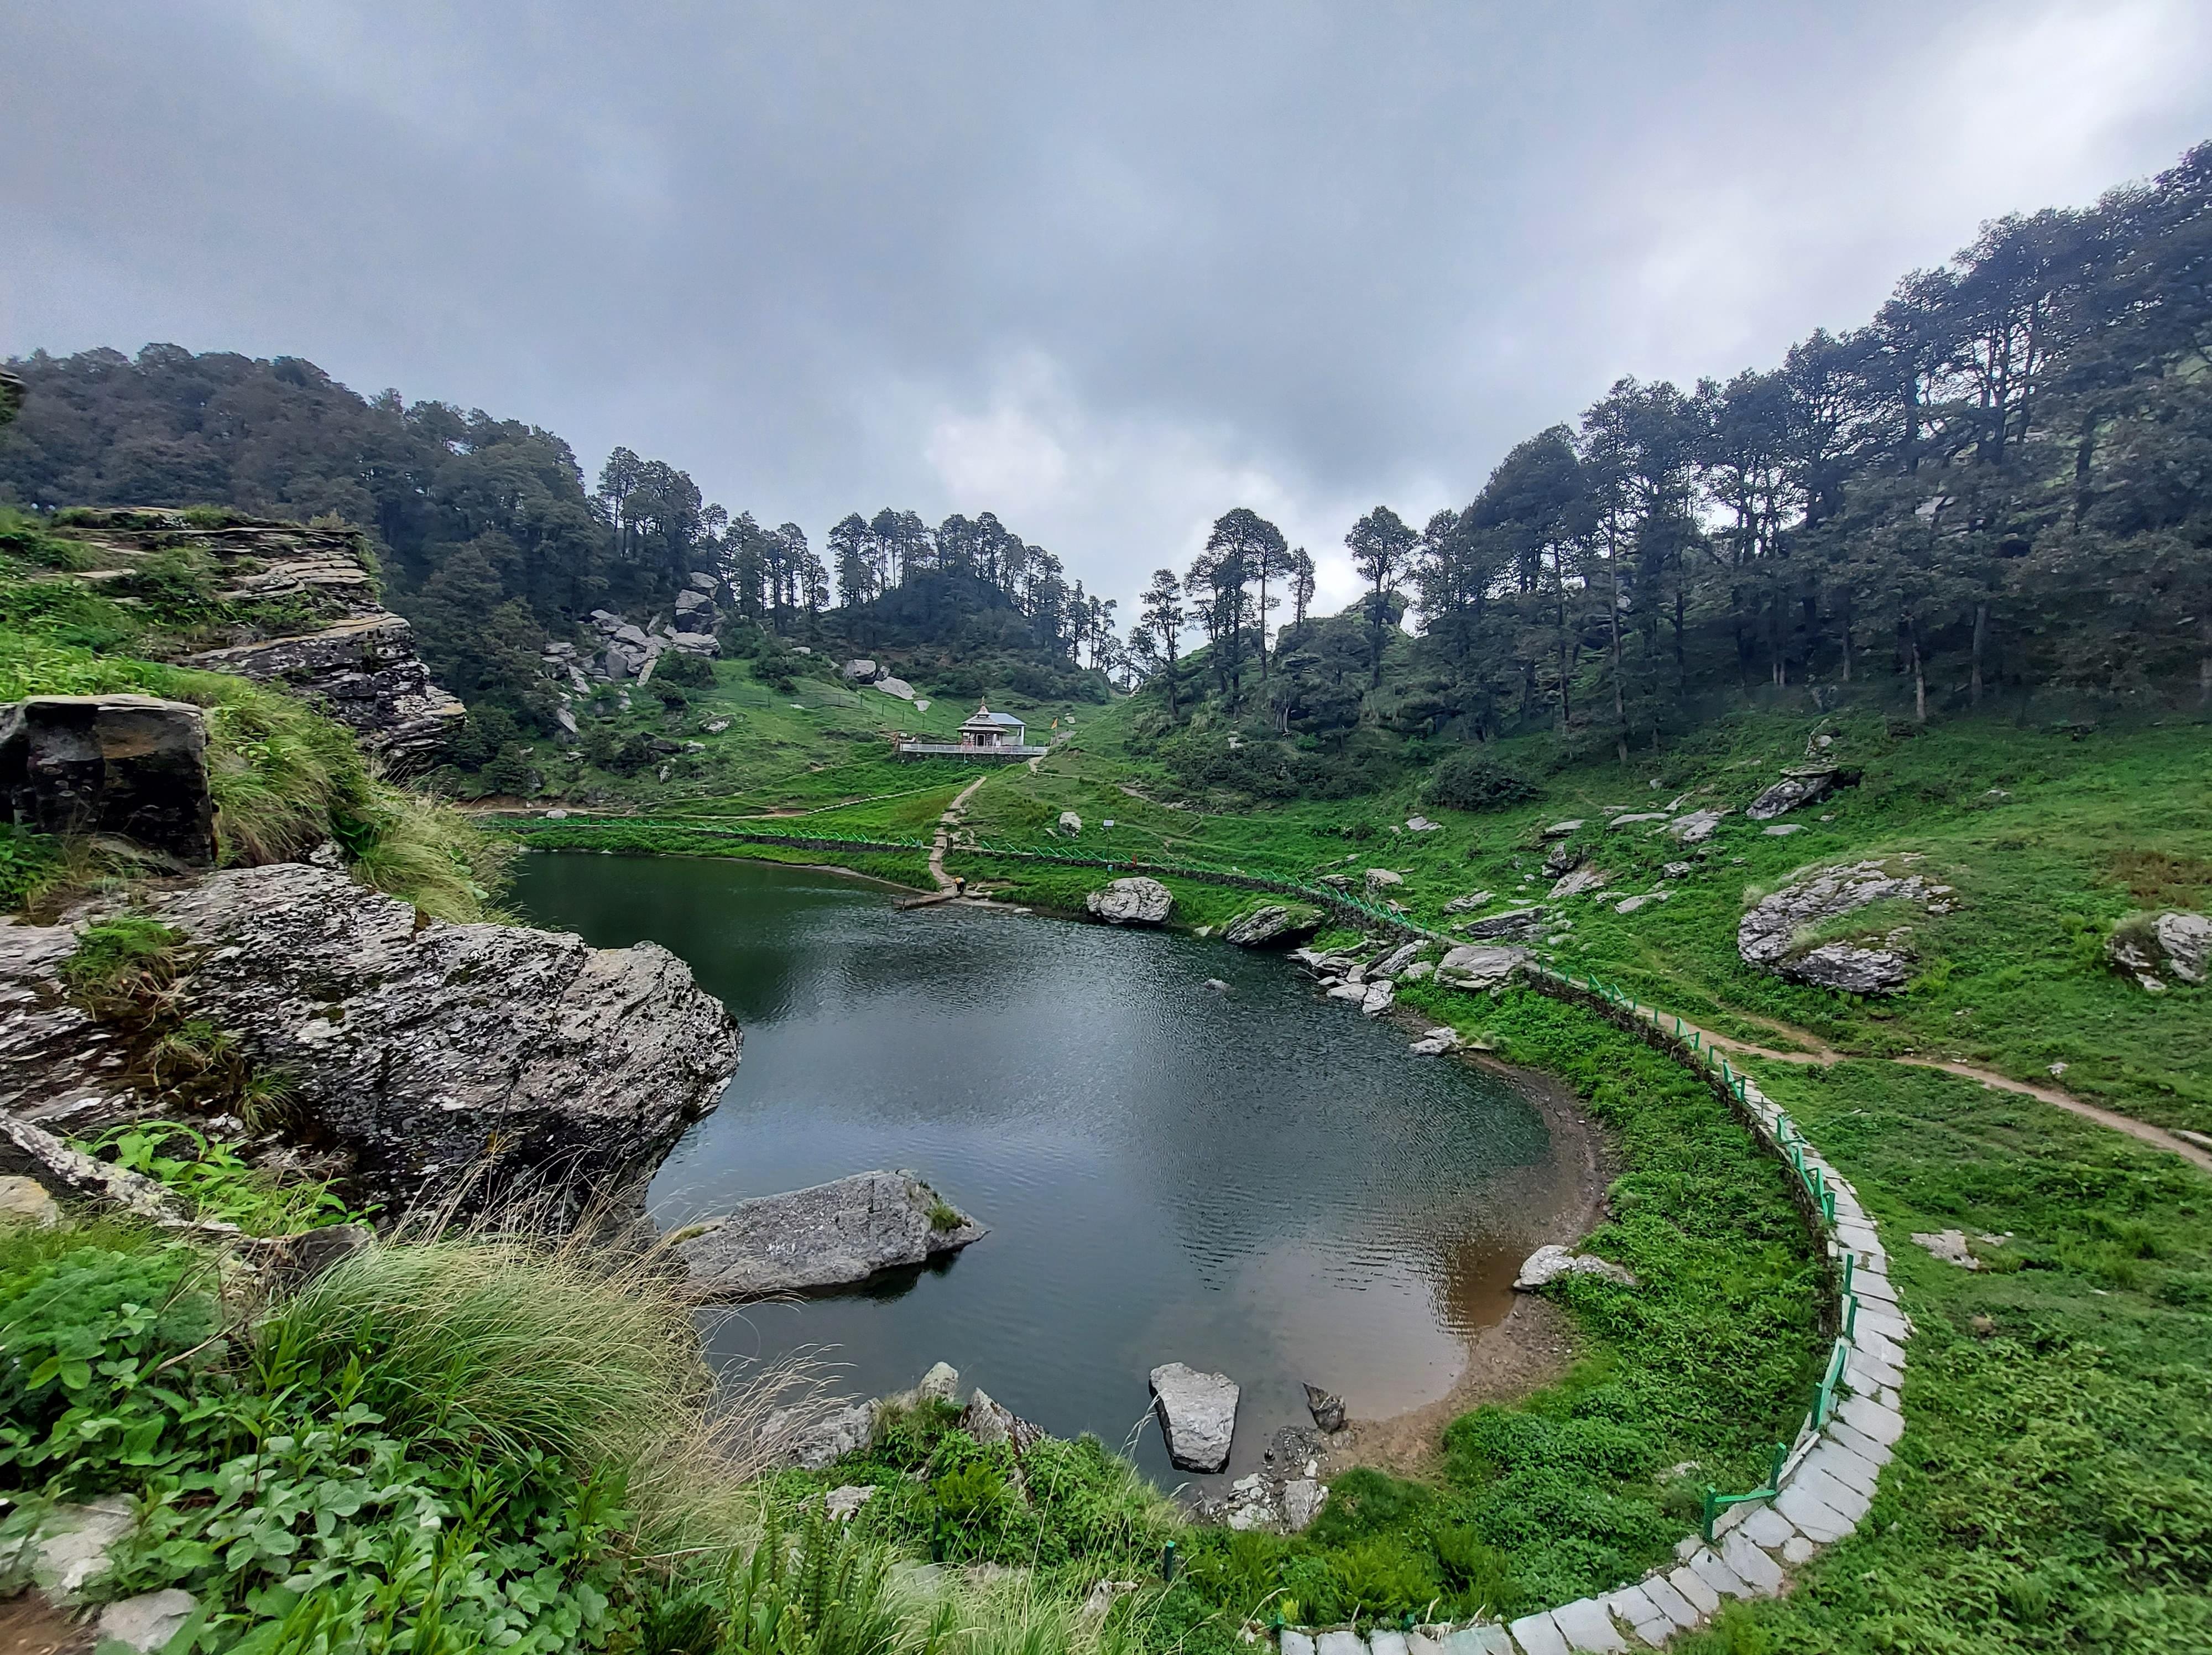 Dhanaulti Packages from Visakhapatnam | Get Upto 40% Off